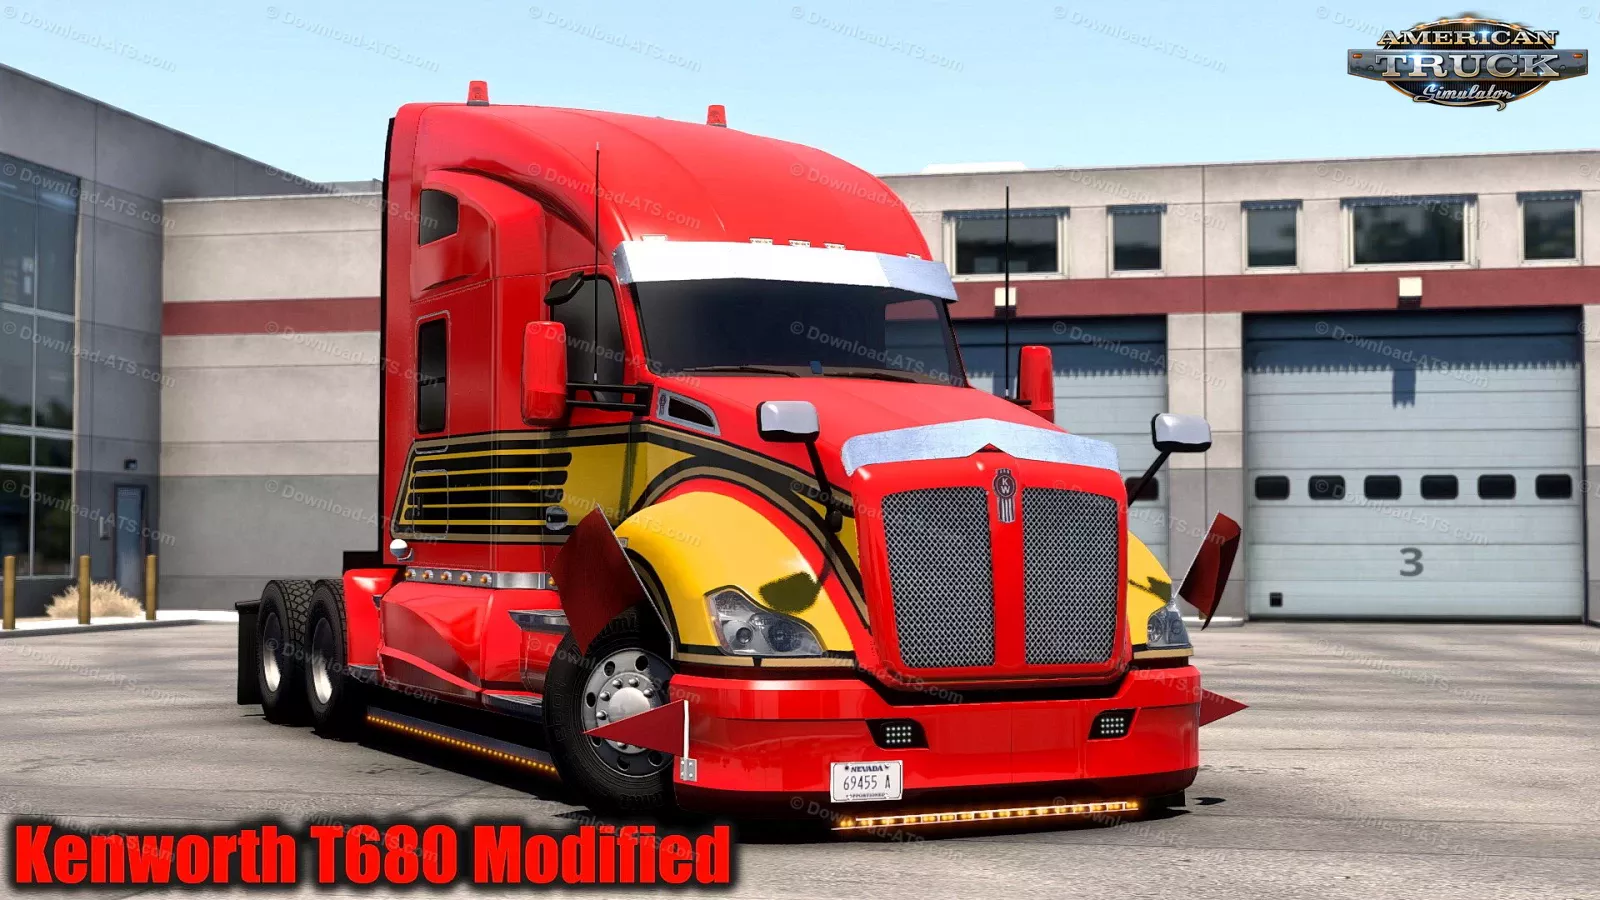 Kenworth T680 Modified Truck v1.6 (1.49.x) for ATS